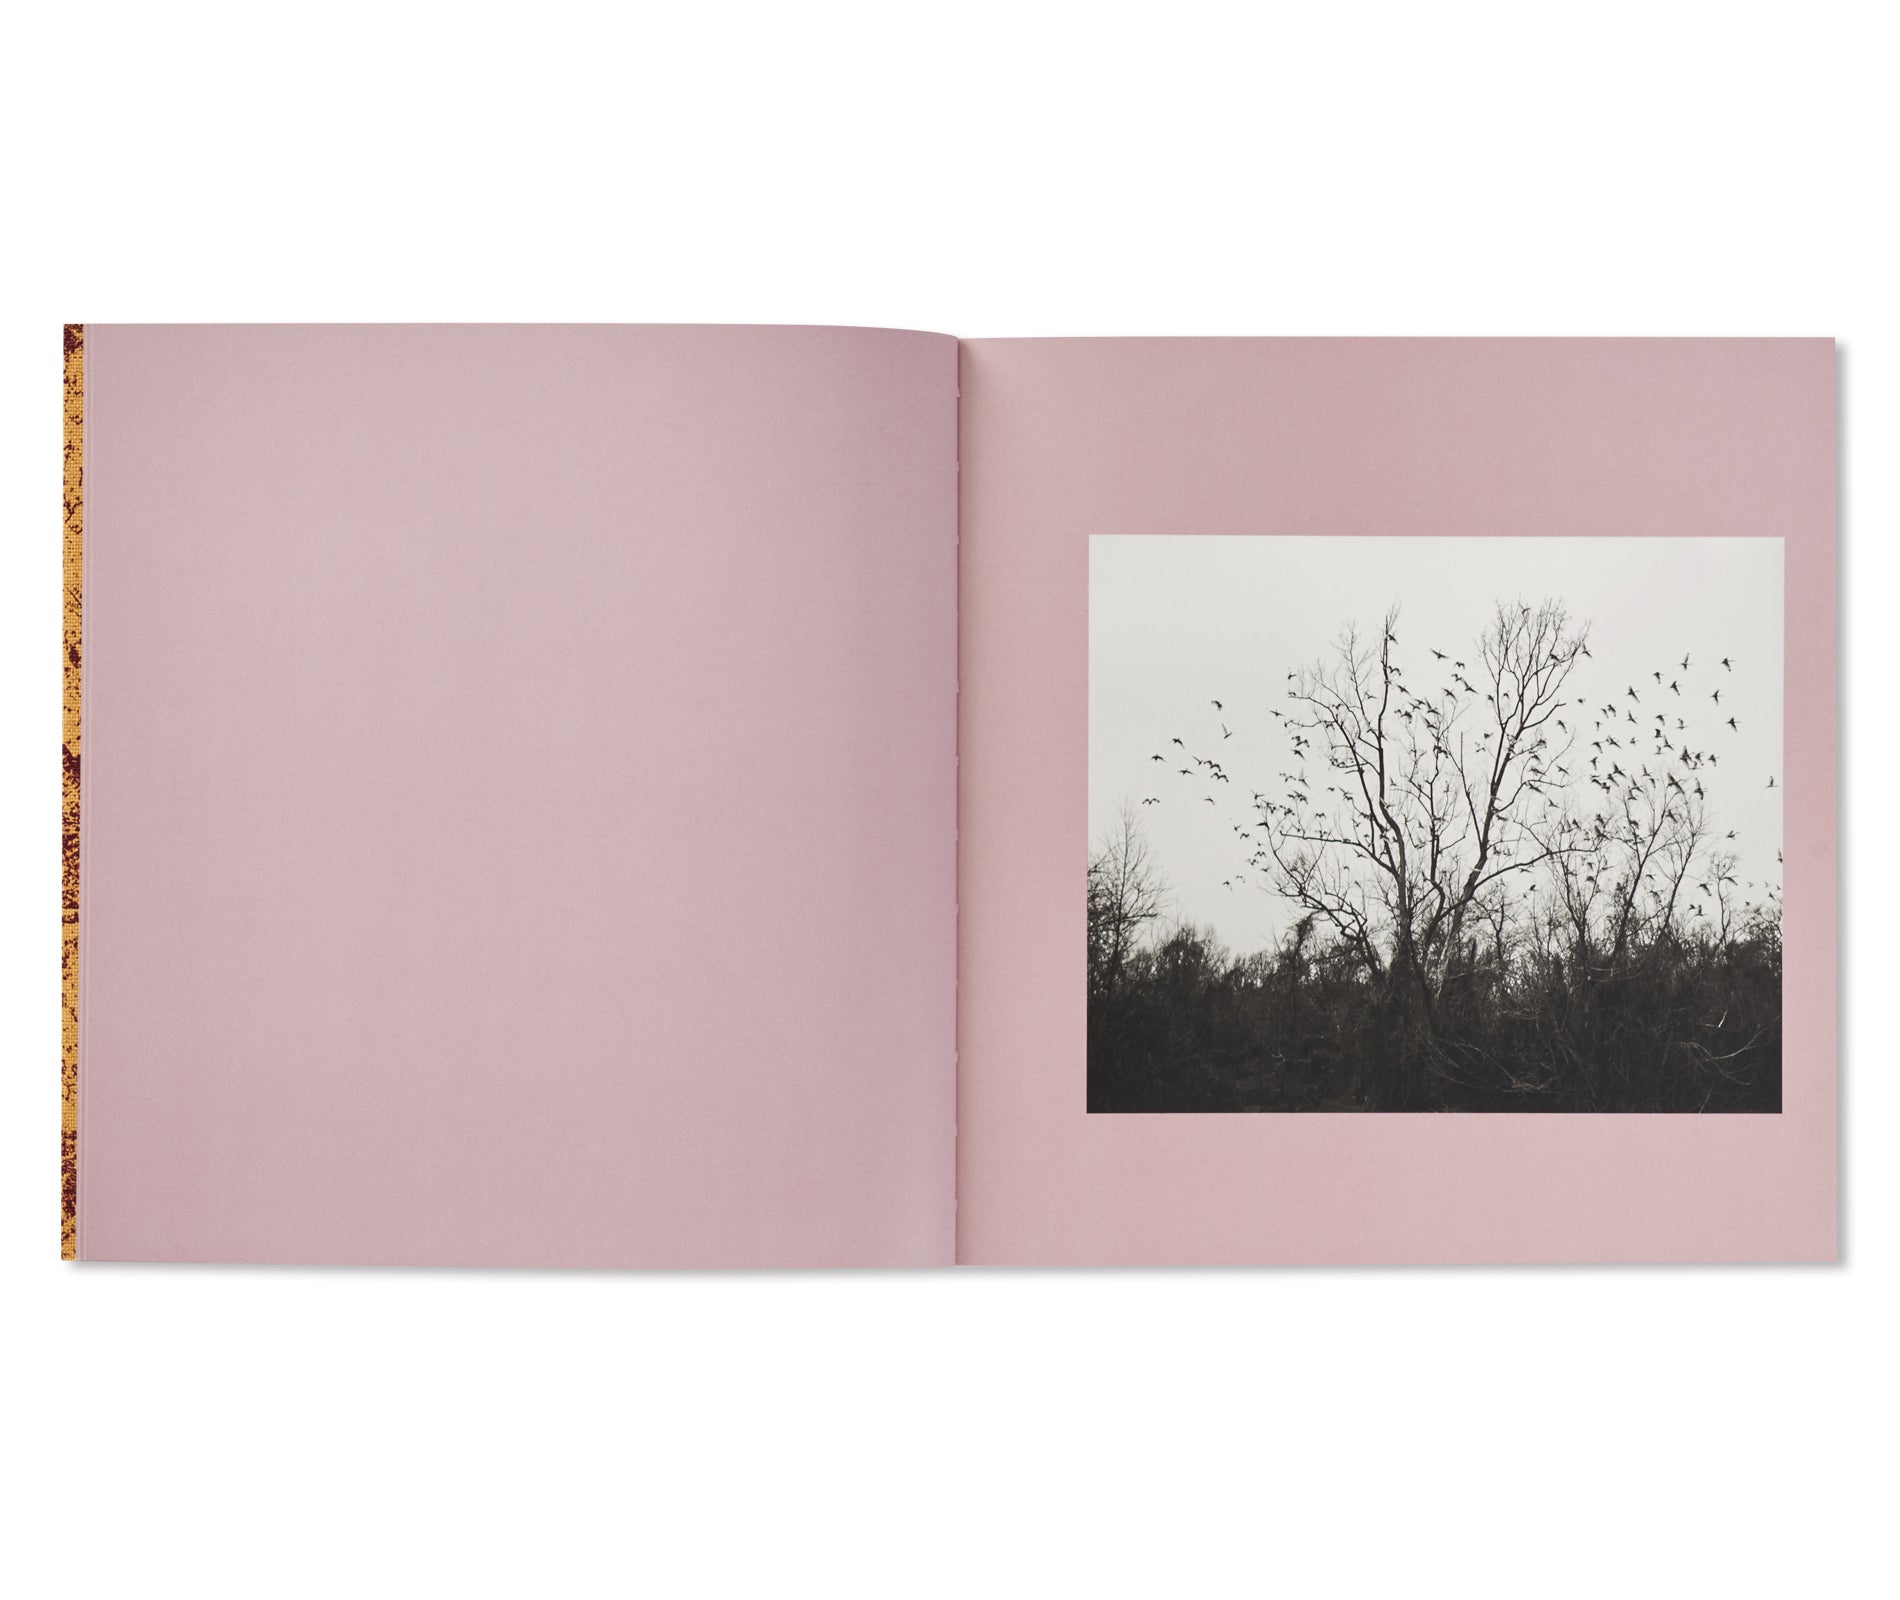 AND TIME FOLDS by Vanessa Winship [SIGNED]